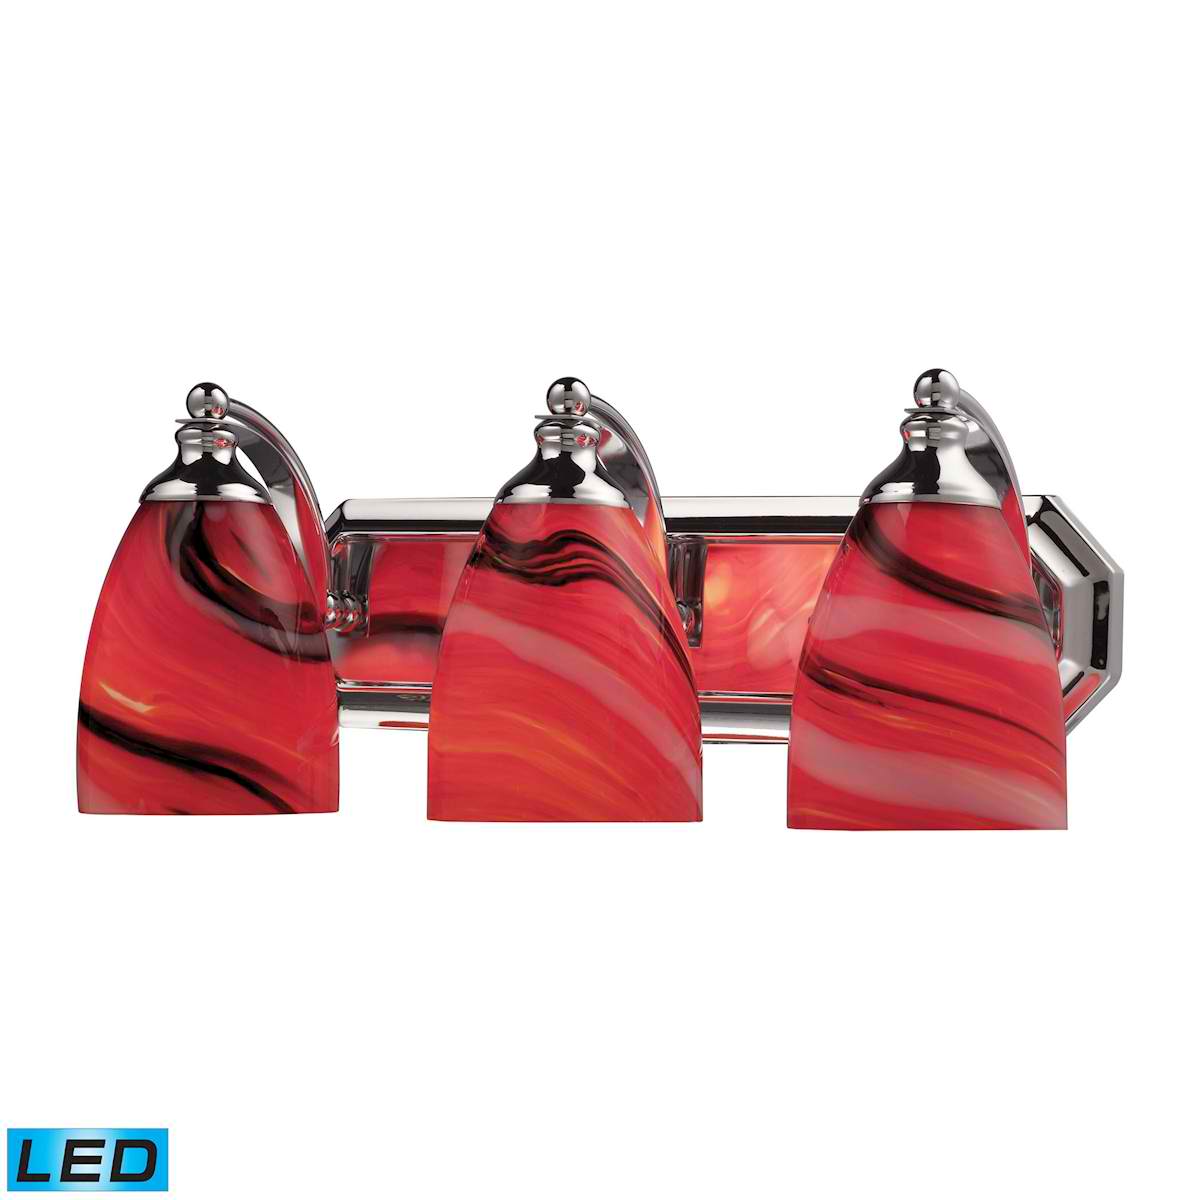 3 Light Vanity in Polished Chrome and Candy Glass - LED, 800 Lumens (2400 Lumens Total) with Full Scale